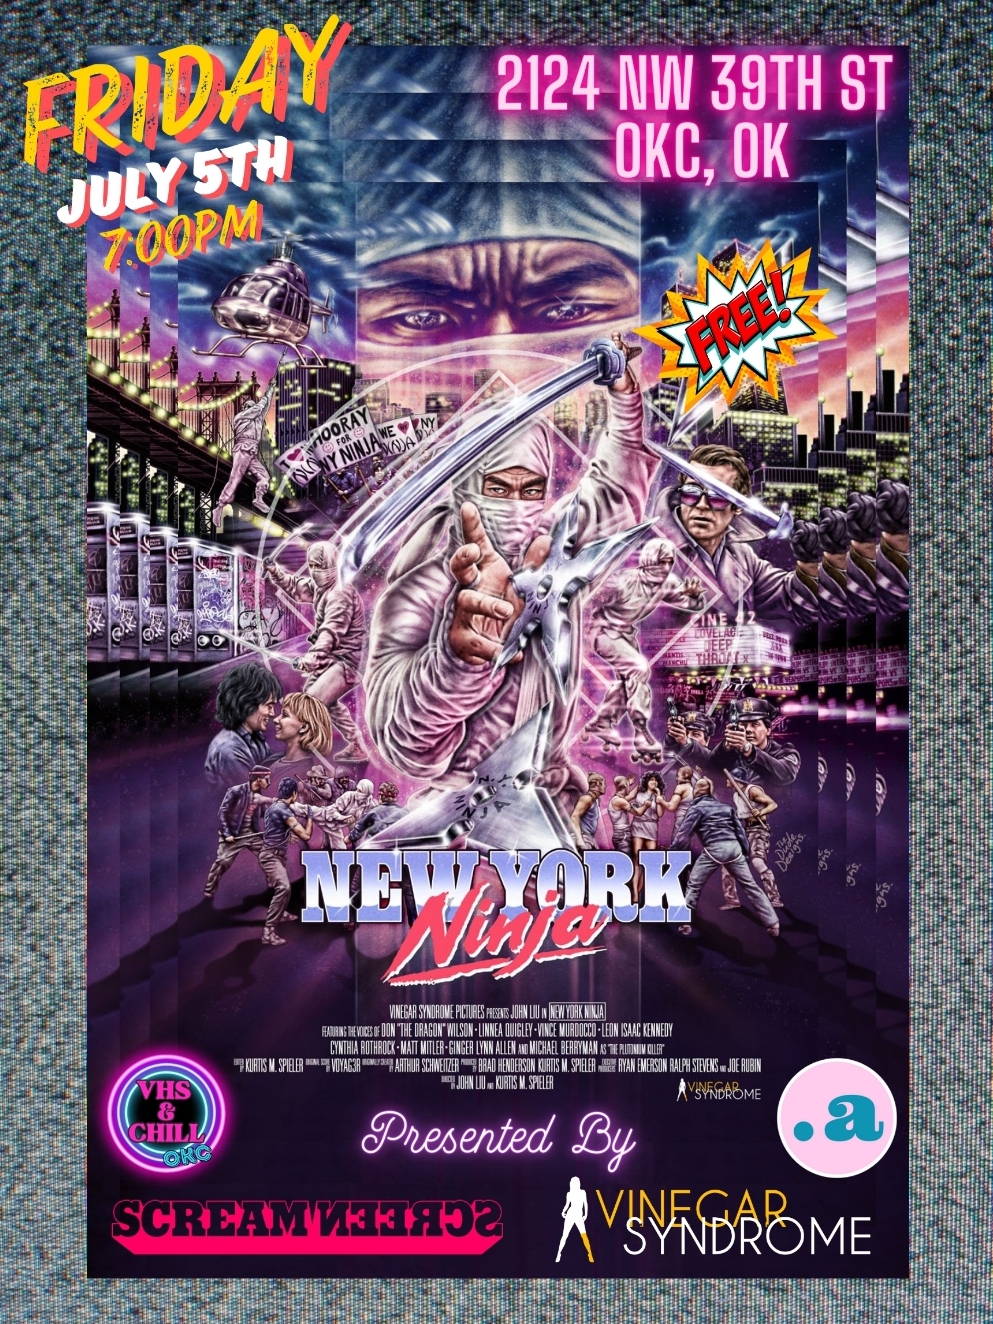 NEW YORK NINJA (2021) presented on VHS! At Point A Gallery, Oklahoma City 